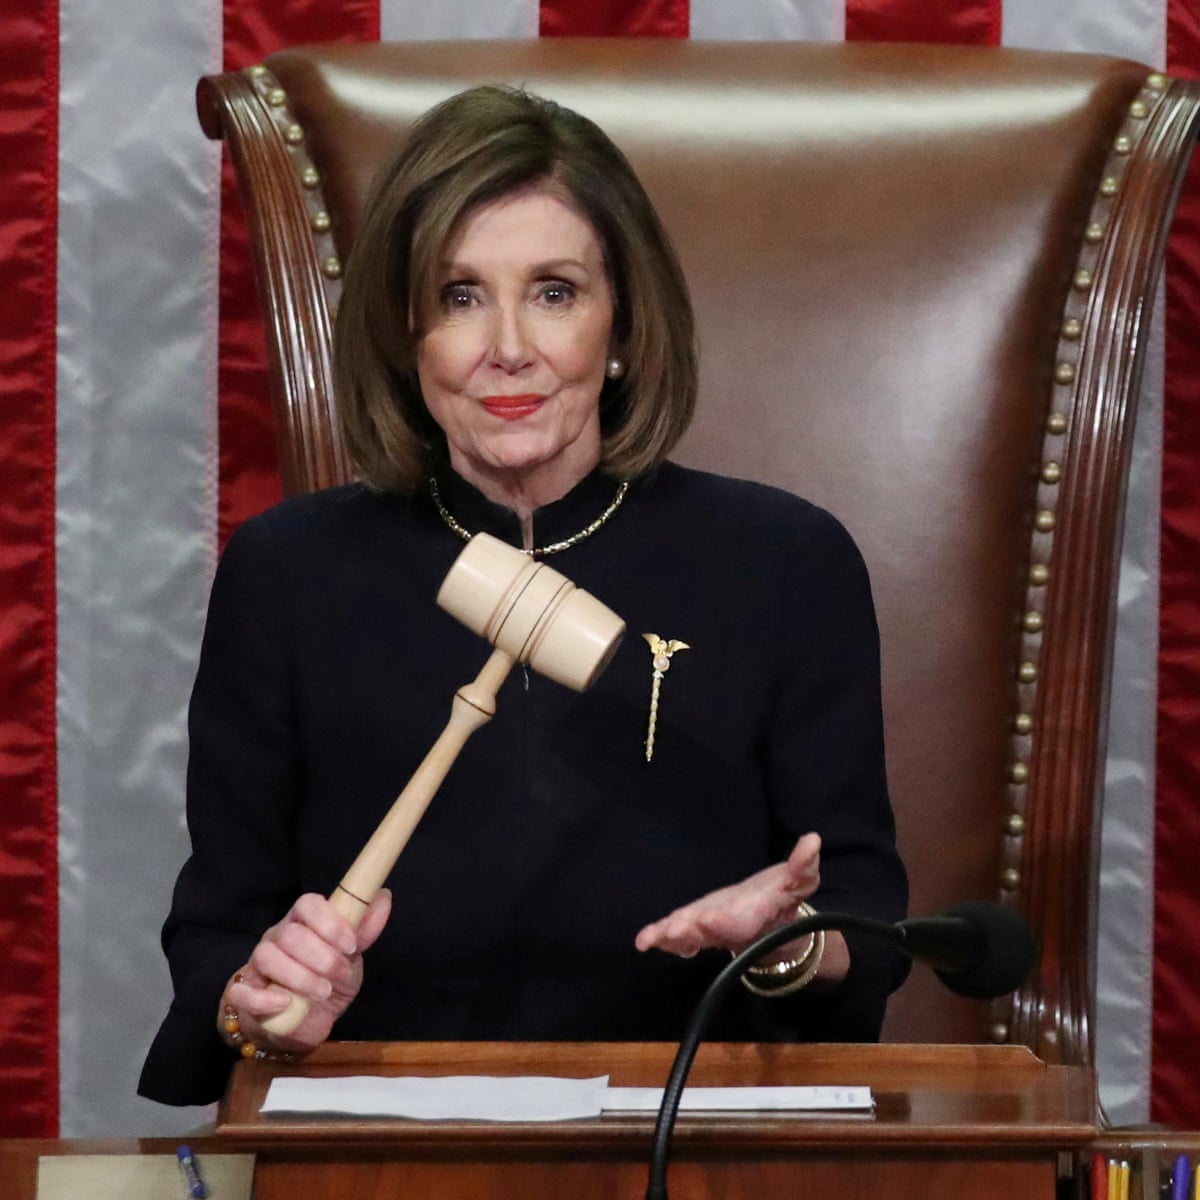 @TimRunsHisMouth She's even taking her gavel home with her, since she heard he likes hammers. #paulpeenhammer #Pelosigaylover #pelosiattack